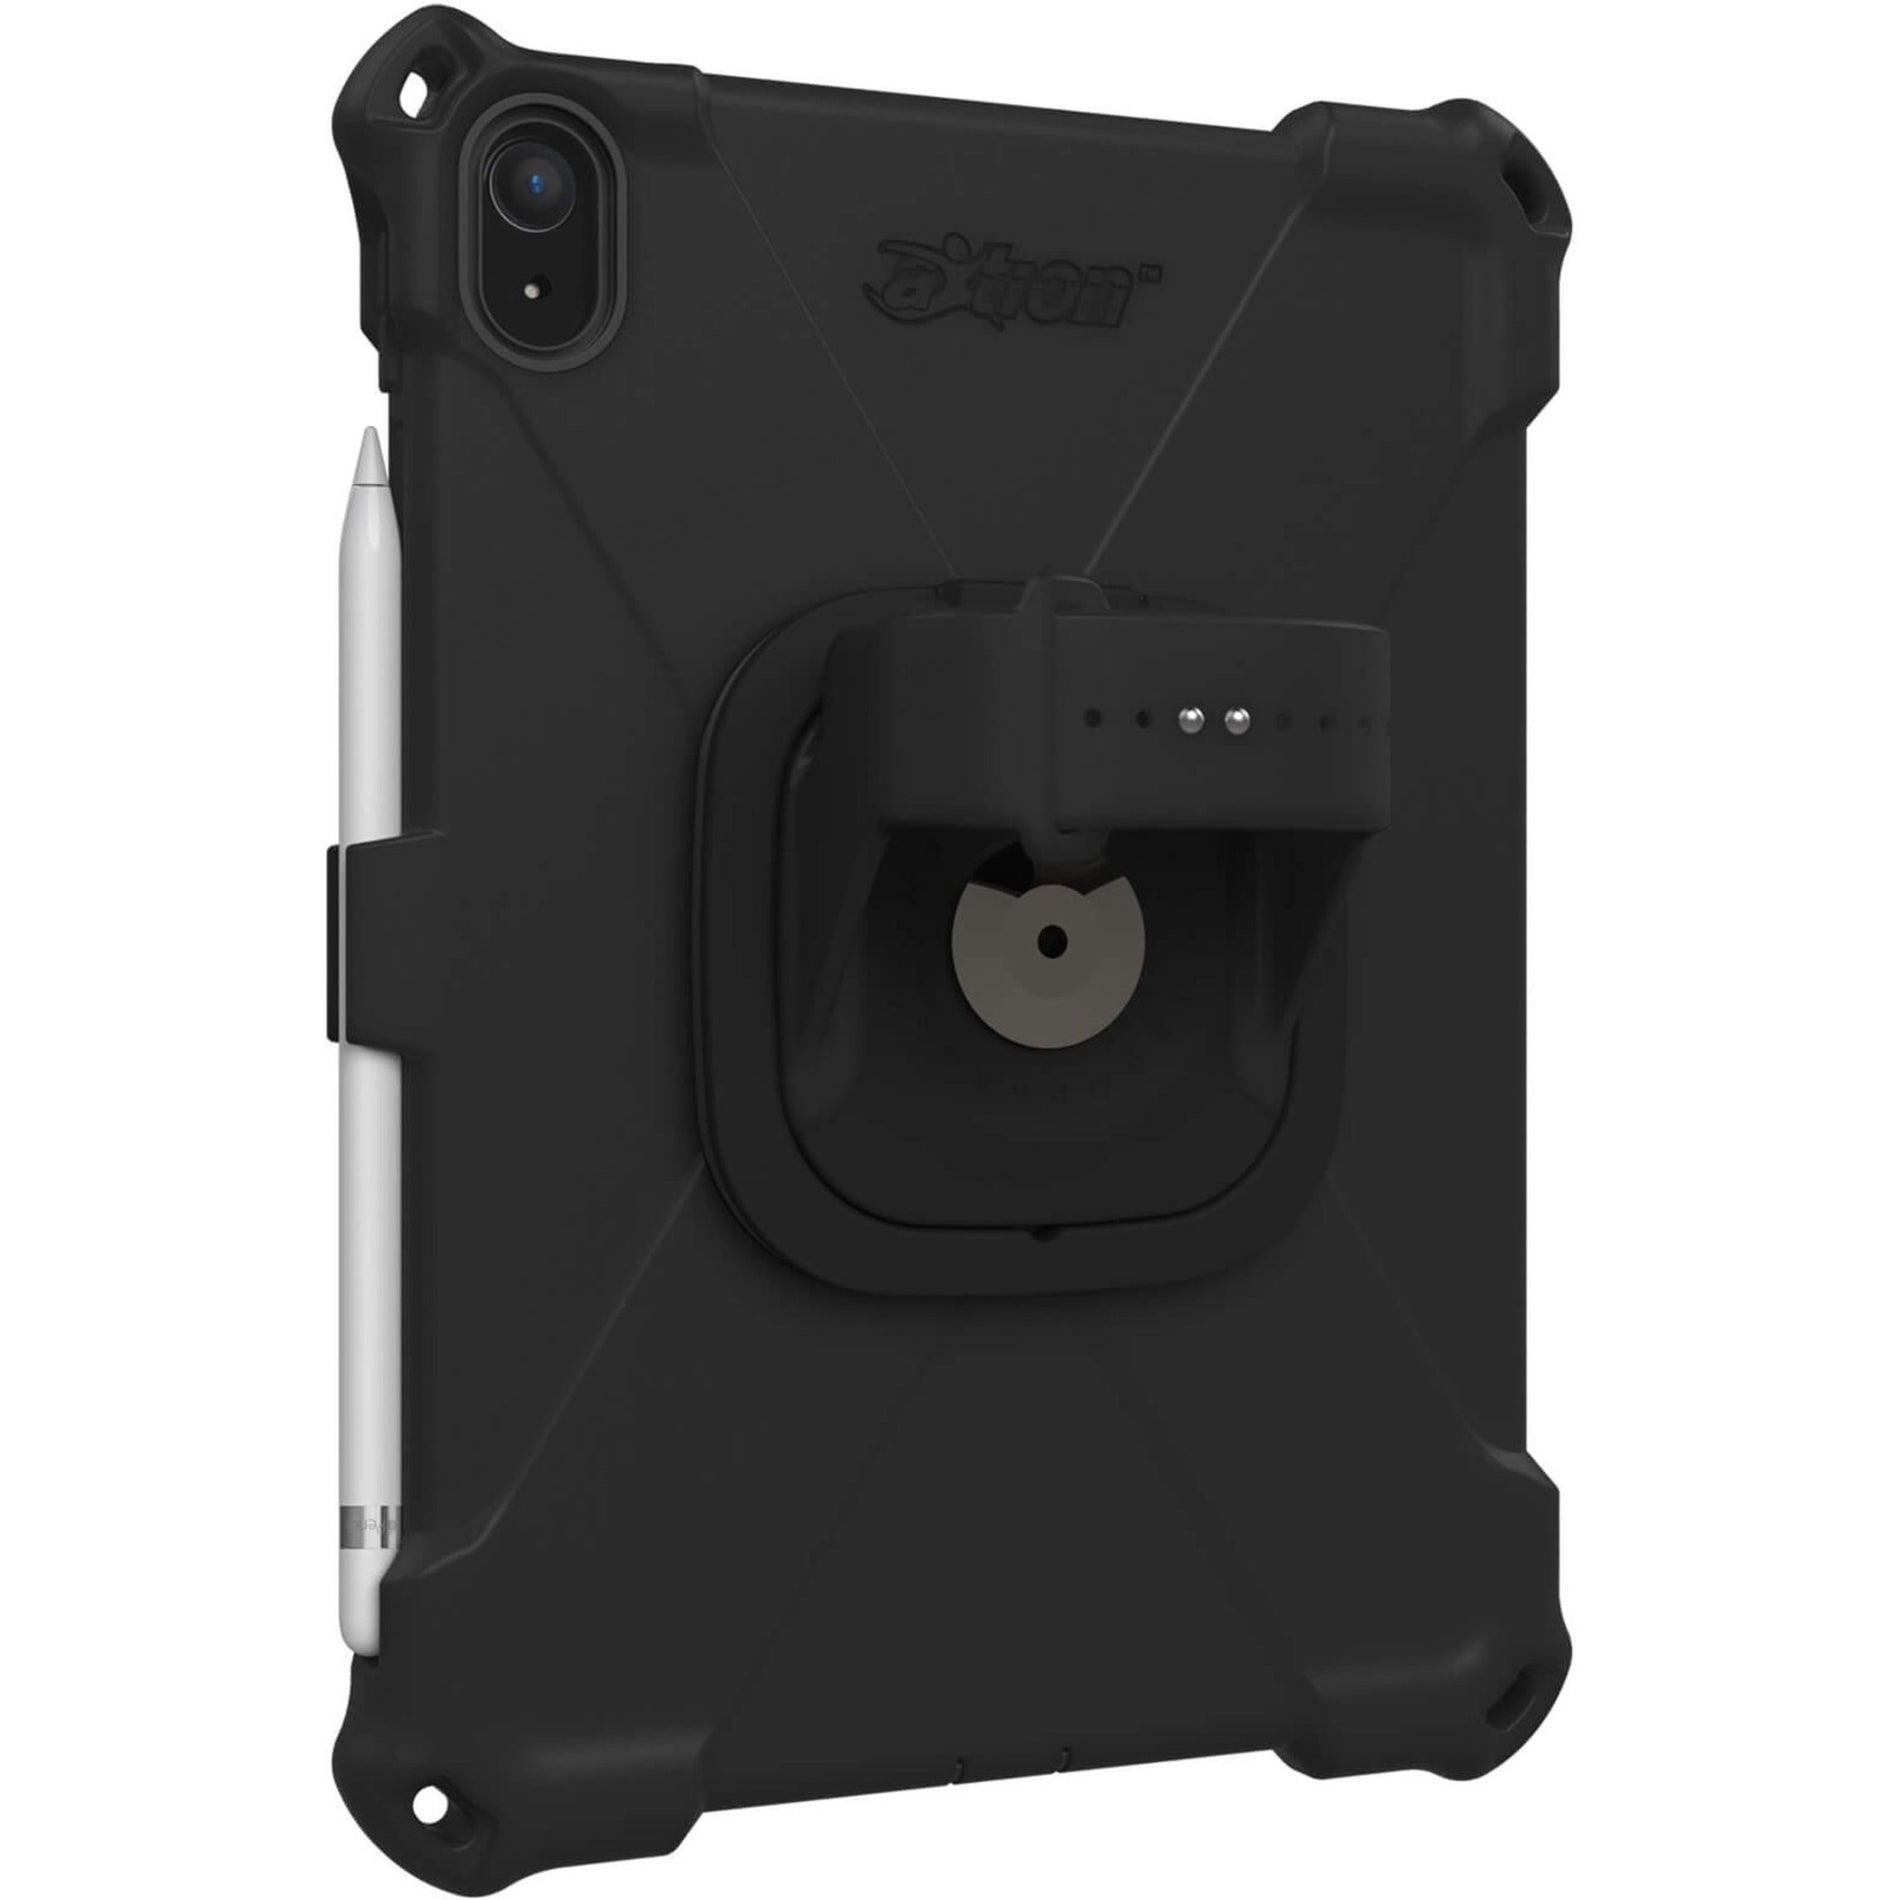 The Joy Factory CWA652MP aXtion Bold MP for iPad 10.9-inch 10th Gen, Military-Grade Water-Resistant Rugged Case with Hand Strap and Kickstand